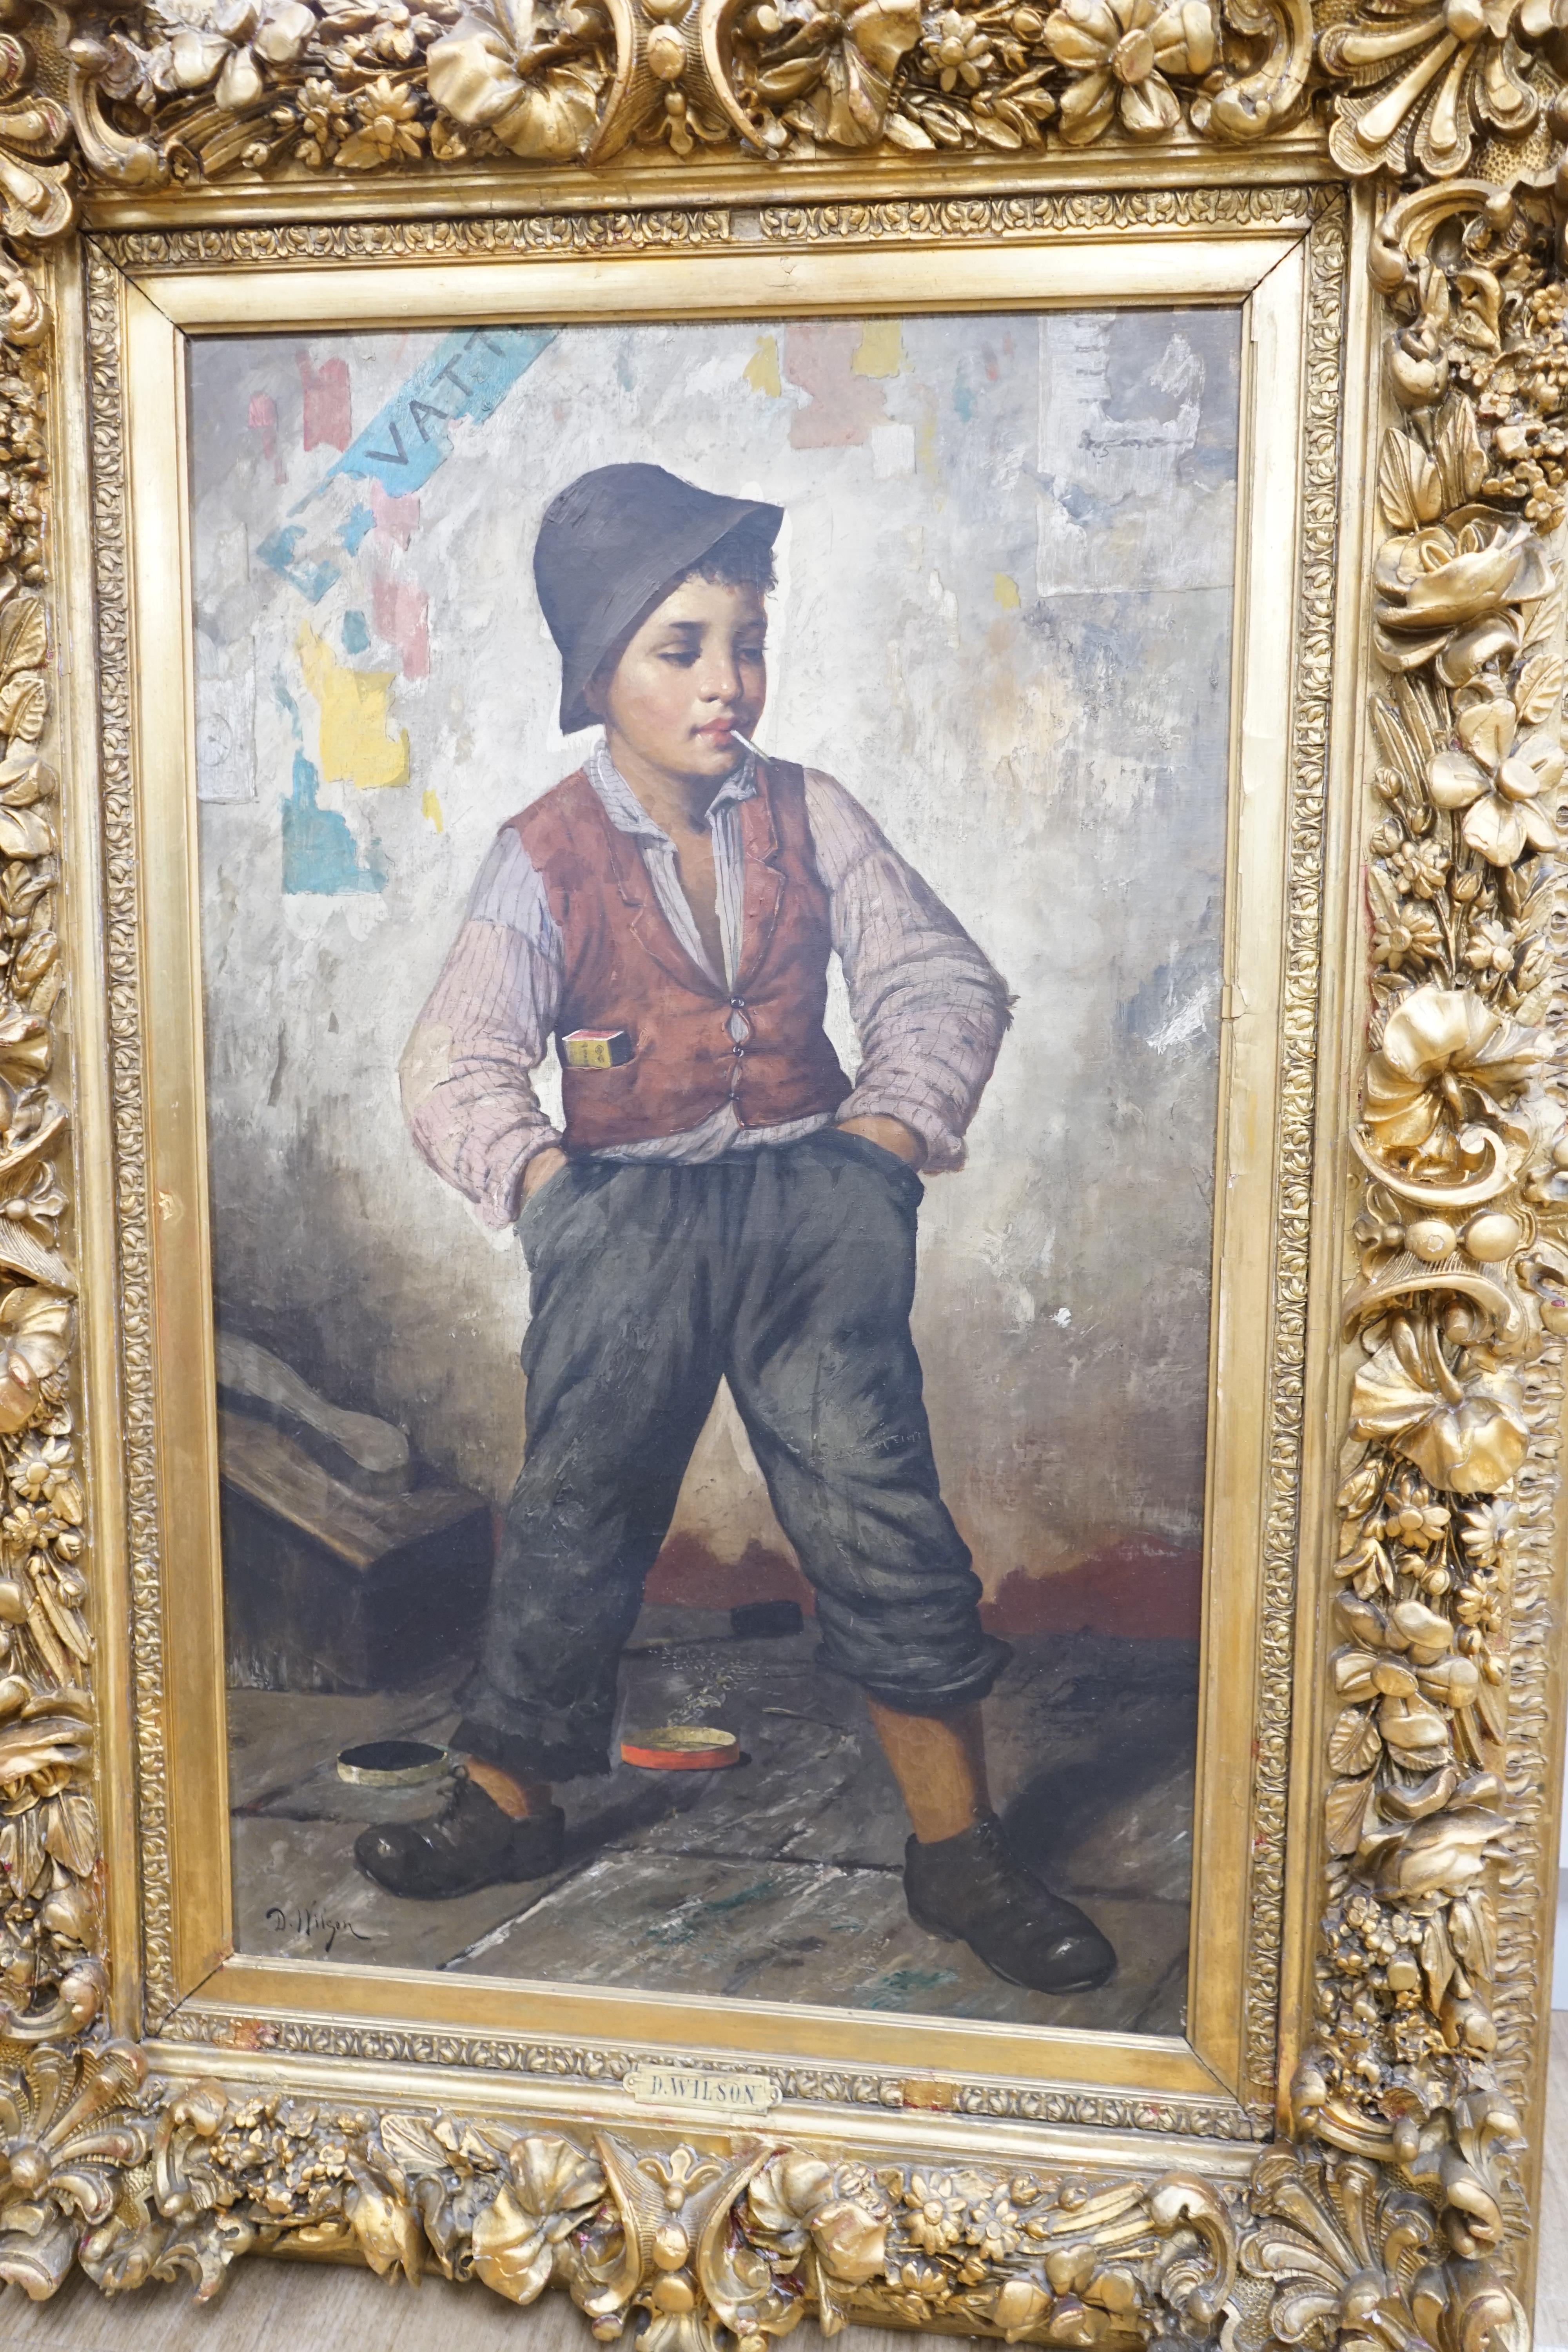 D. Wilson (19th C.), oil on canvas, Full length study of a boy smoking, signed, applied plaque to the frame, 79 x 48cm, ornate gilt framed. Condition - fair, losses to the frame